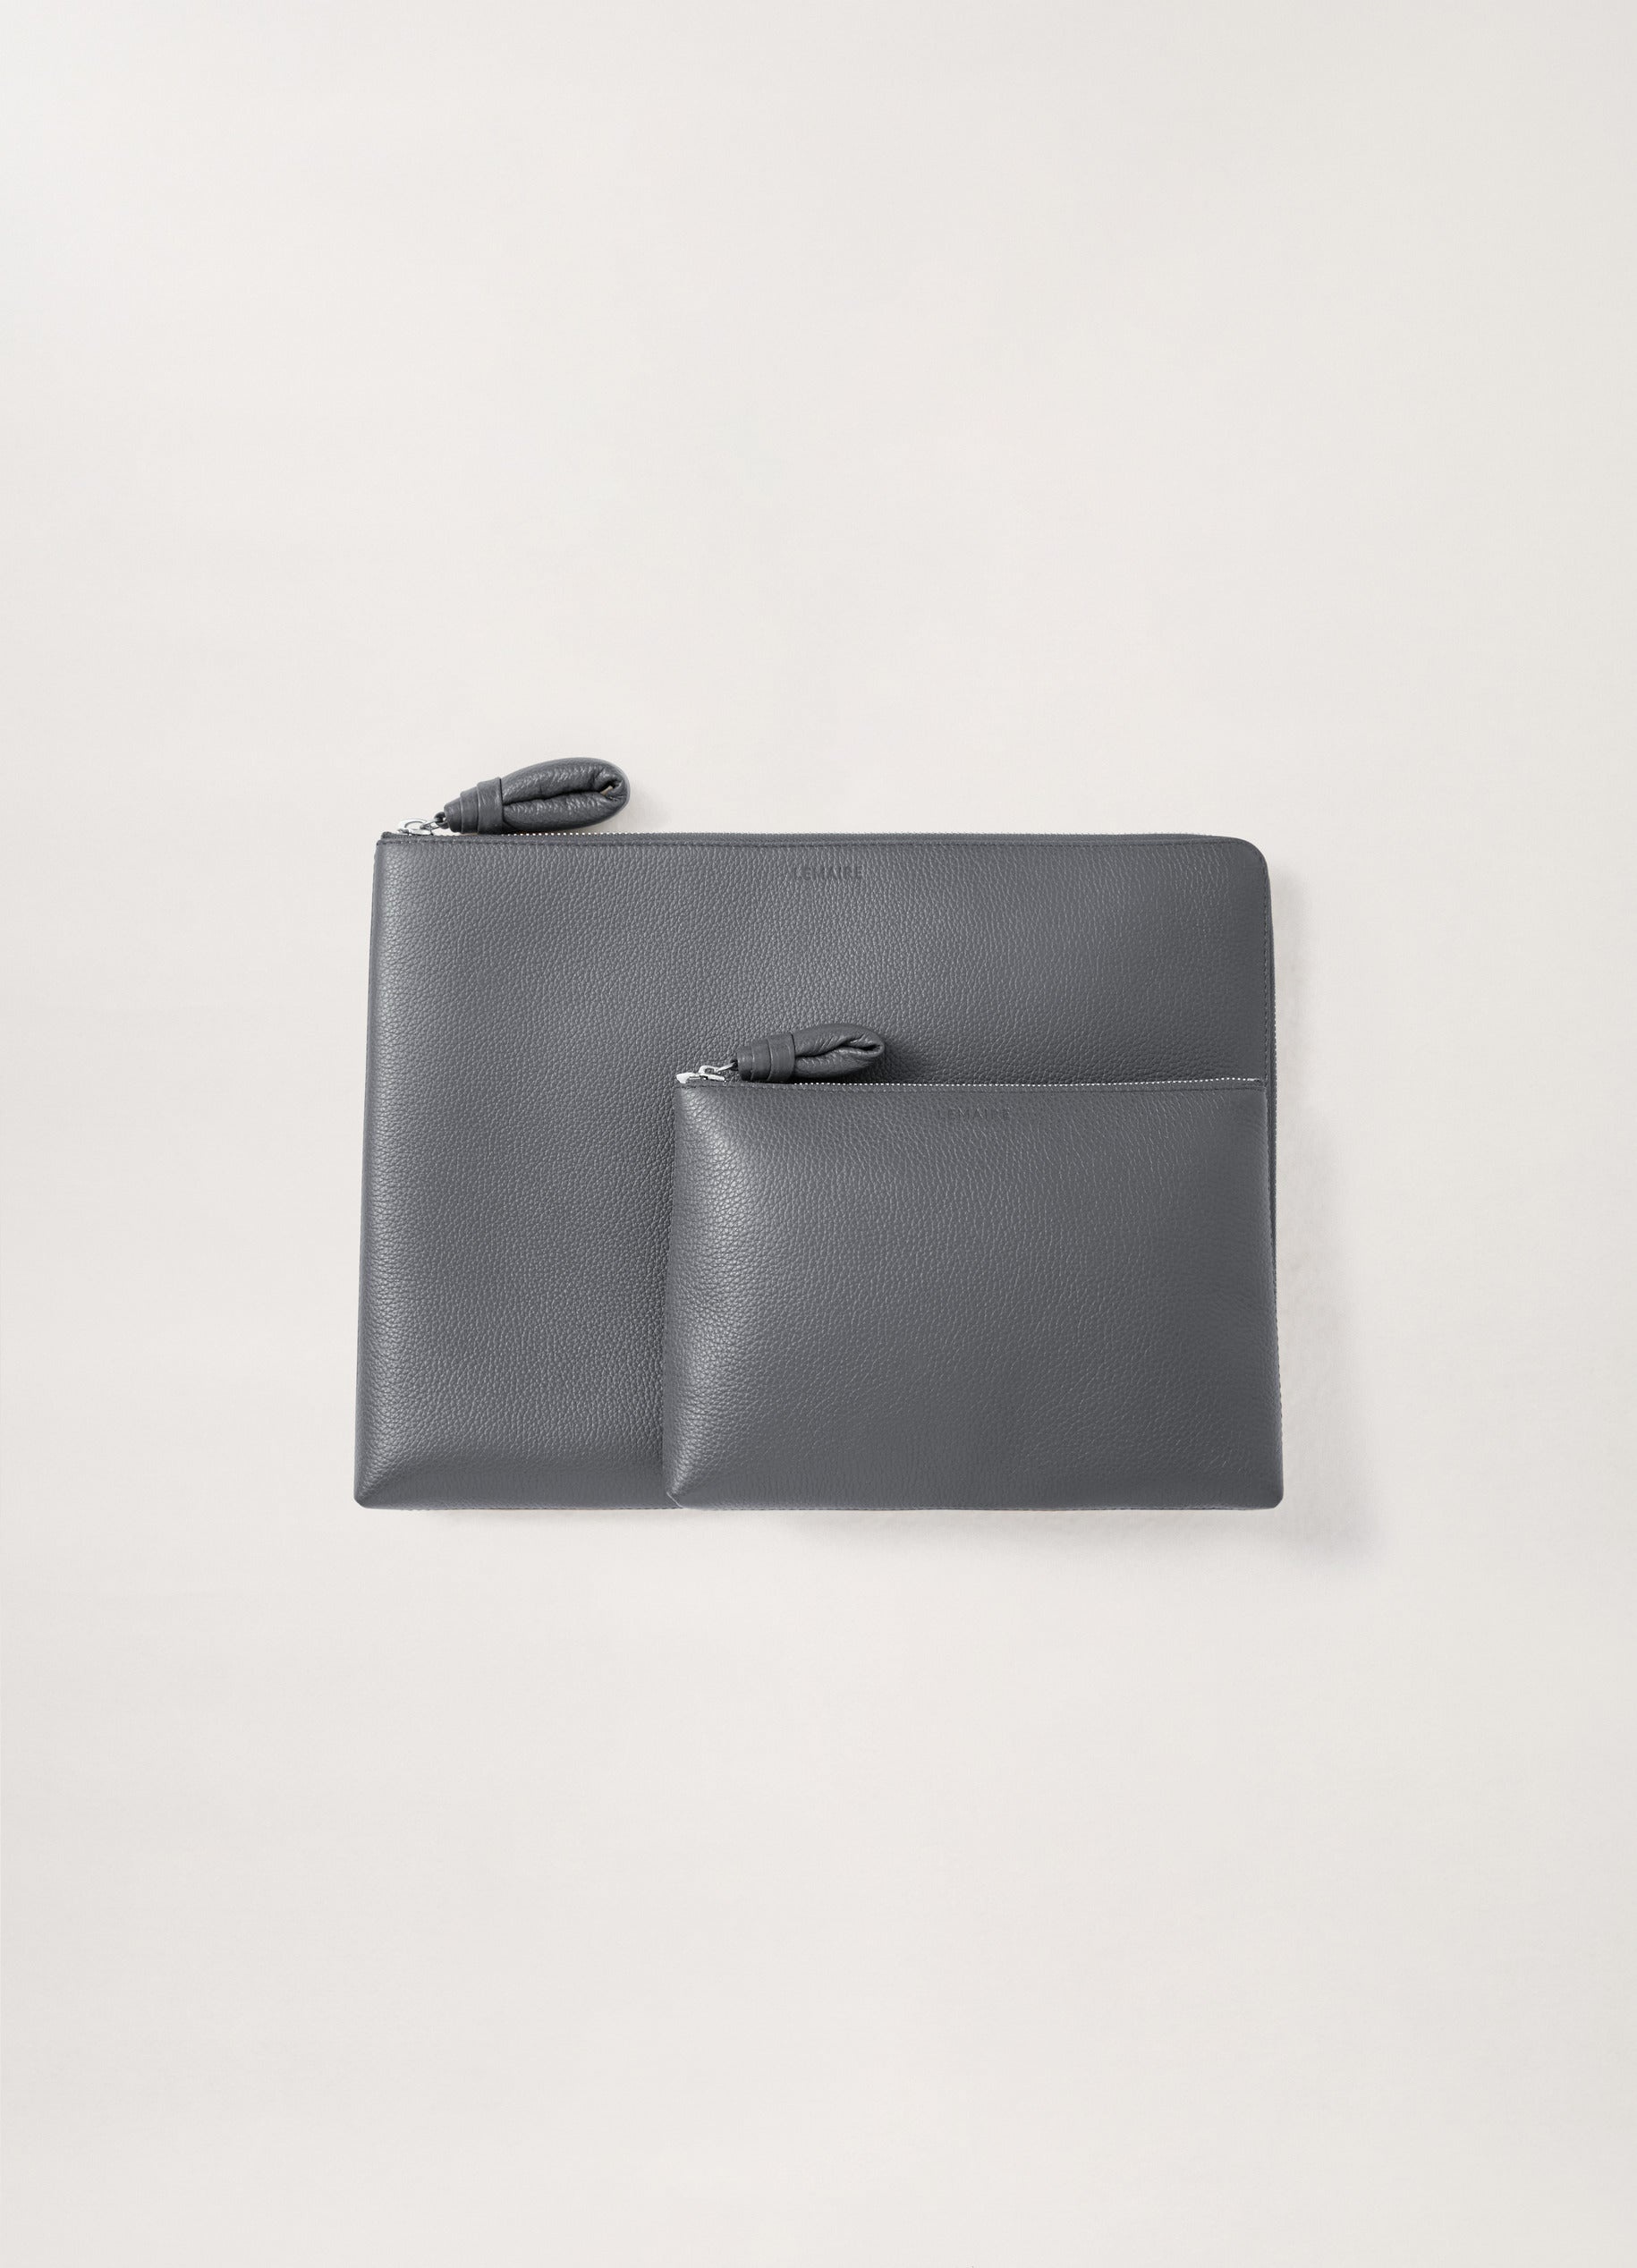 DOCUMENT HOLDER
SOFT GRAINED LEATHER - 2